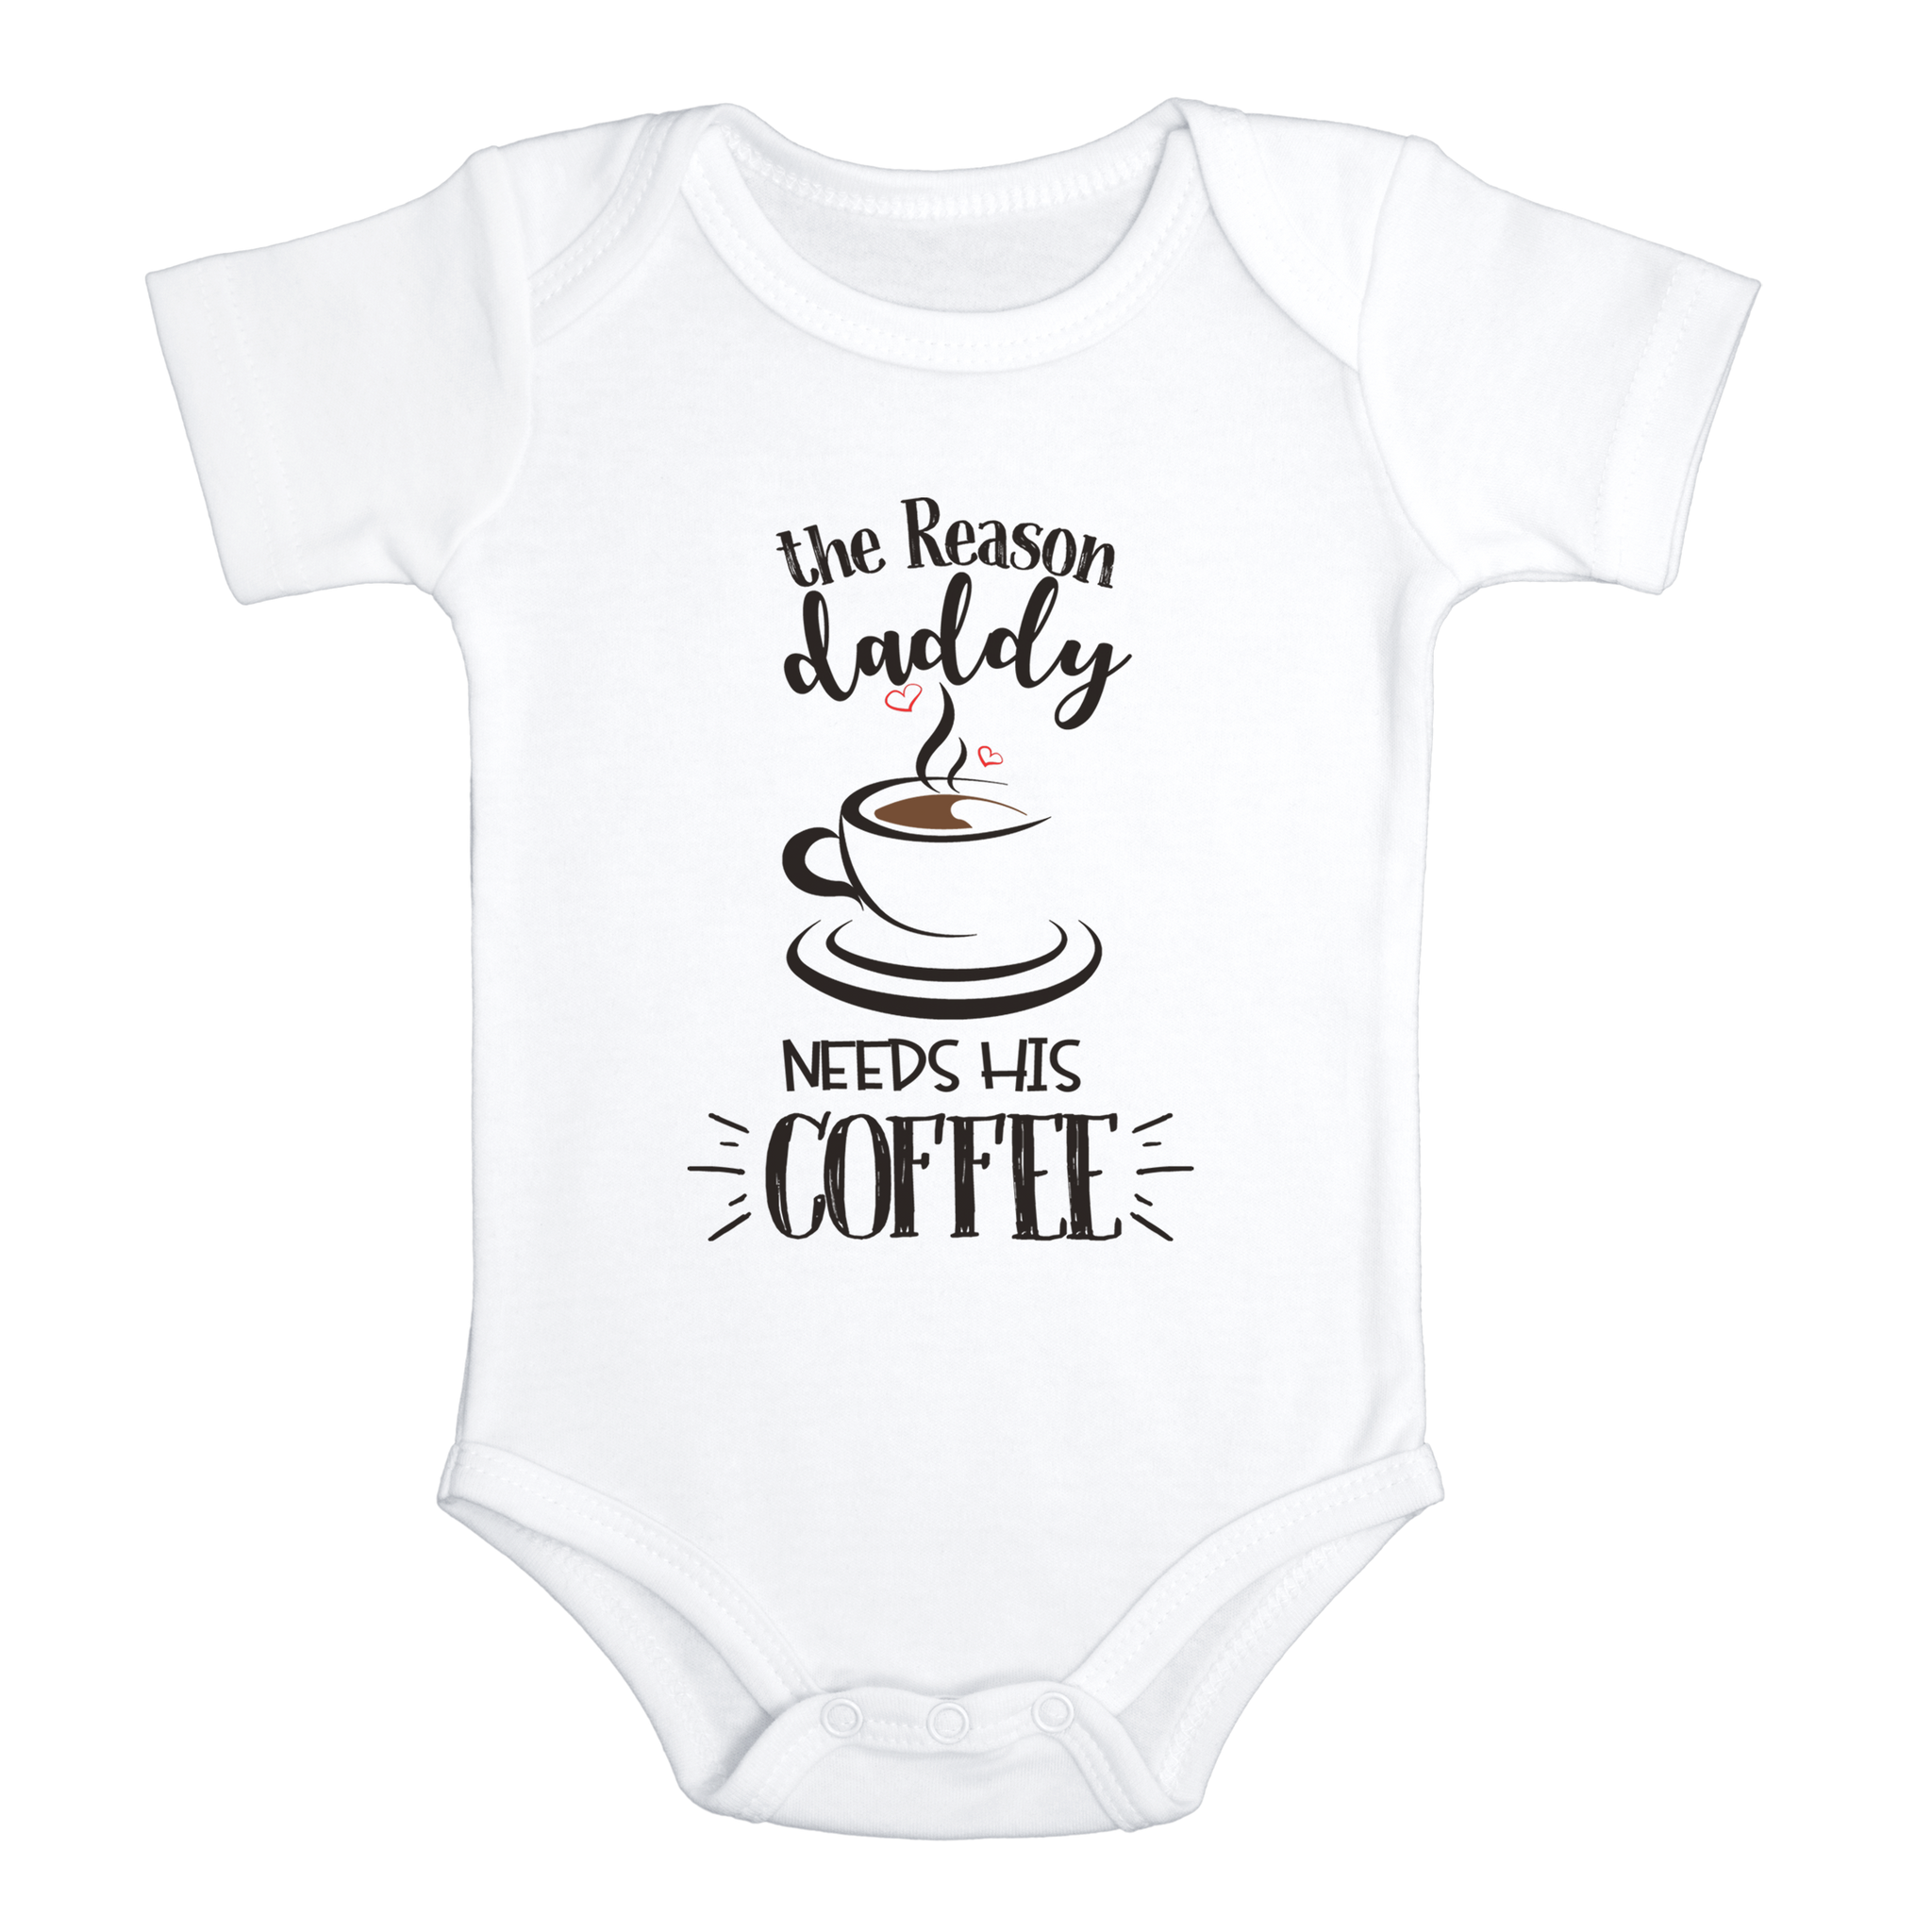 THE REASON DADDY NEED HIS COFFEE Funny Baby Bodysuit / Coffee Onesie White - HappyAddition